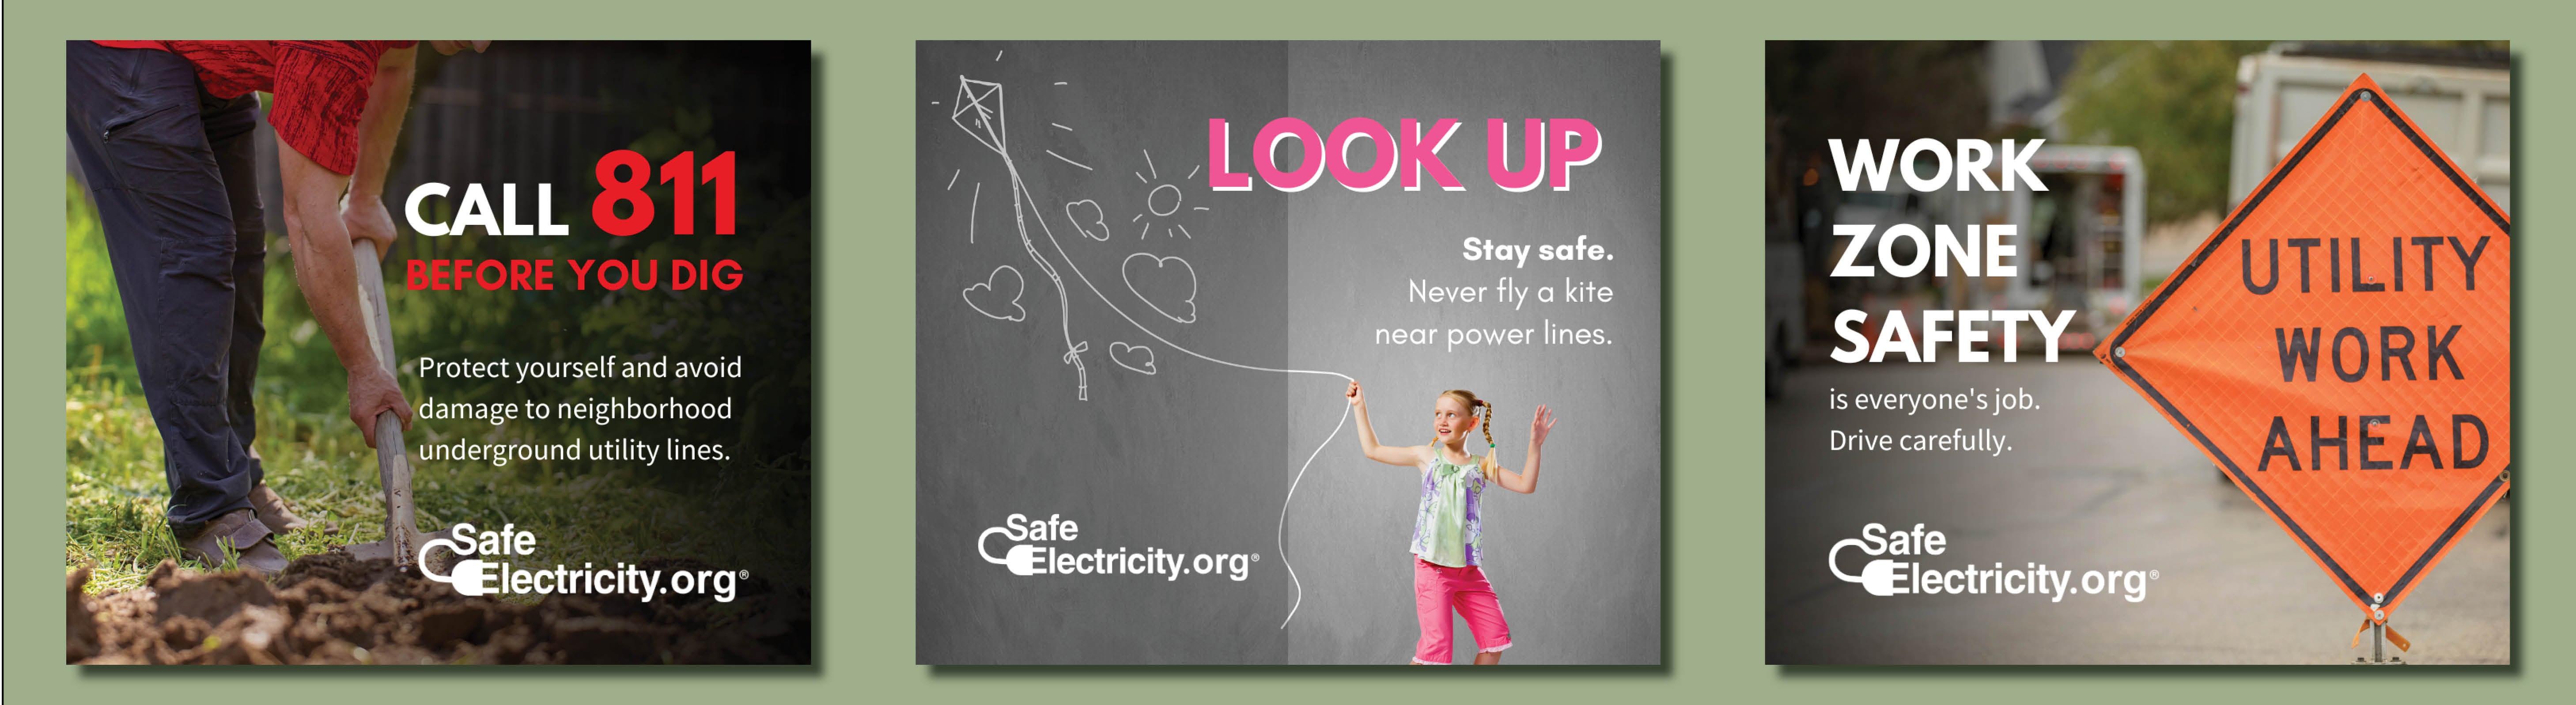 Call 811 before digging, don't fly kites near power lines, drive carefully in work zones